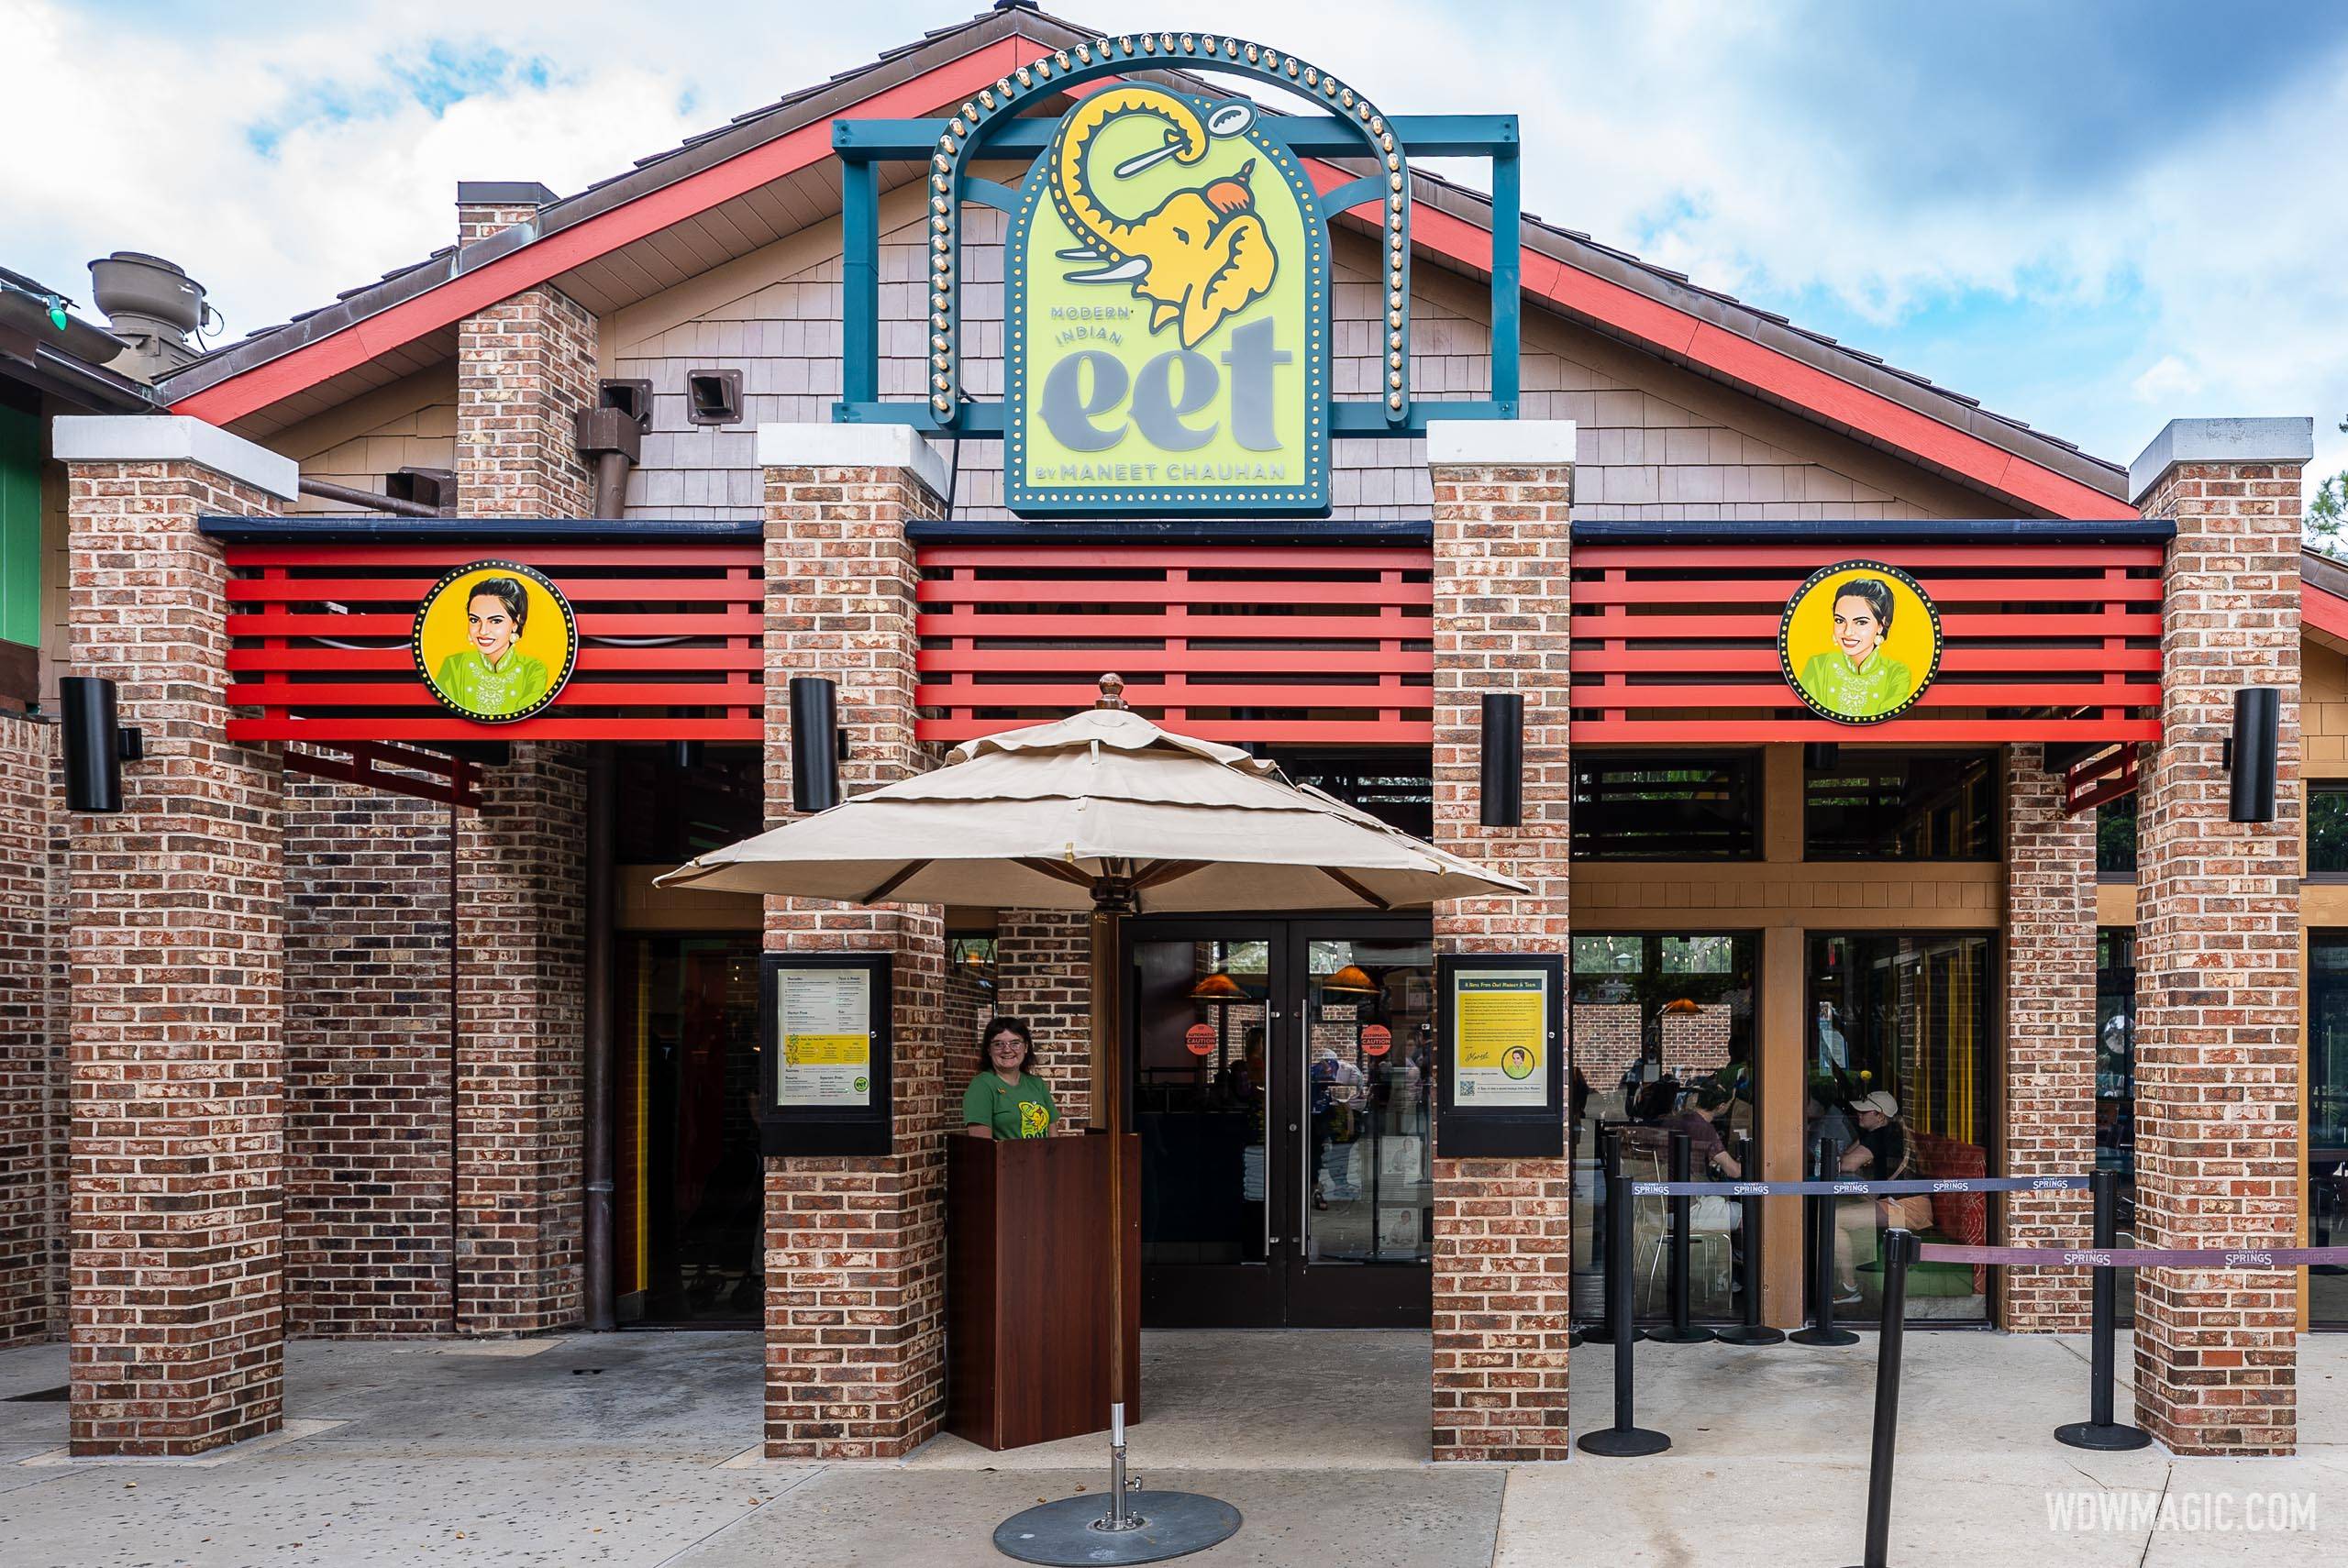 'eet' by Chef Maneet Chauhan now open at Disney Springs